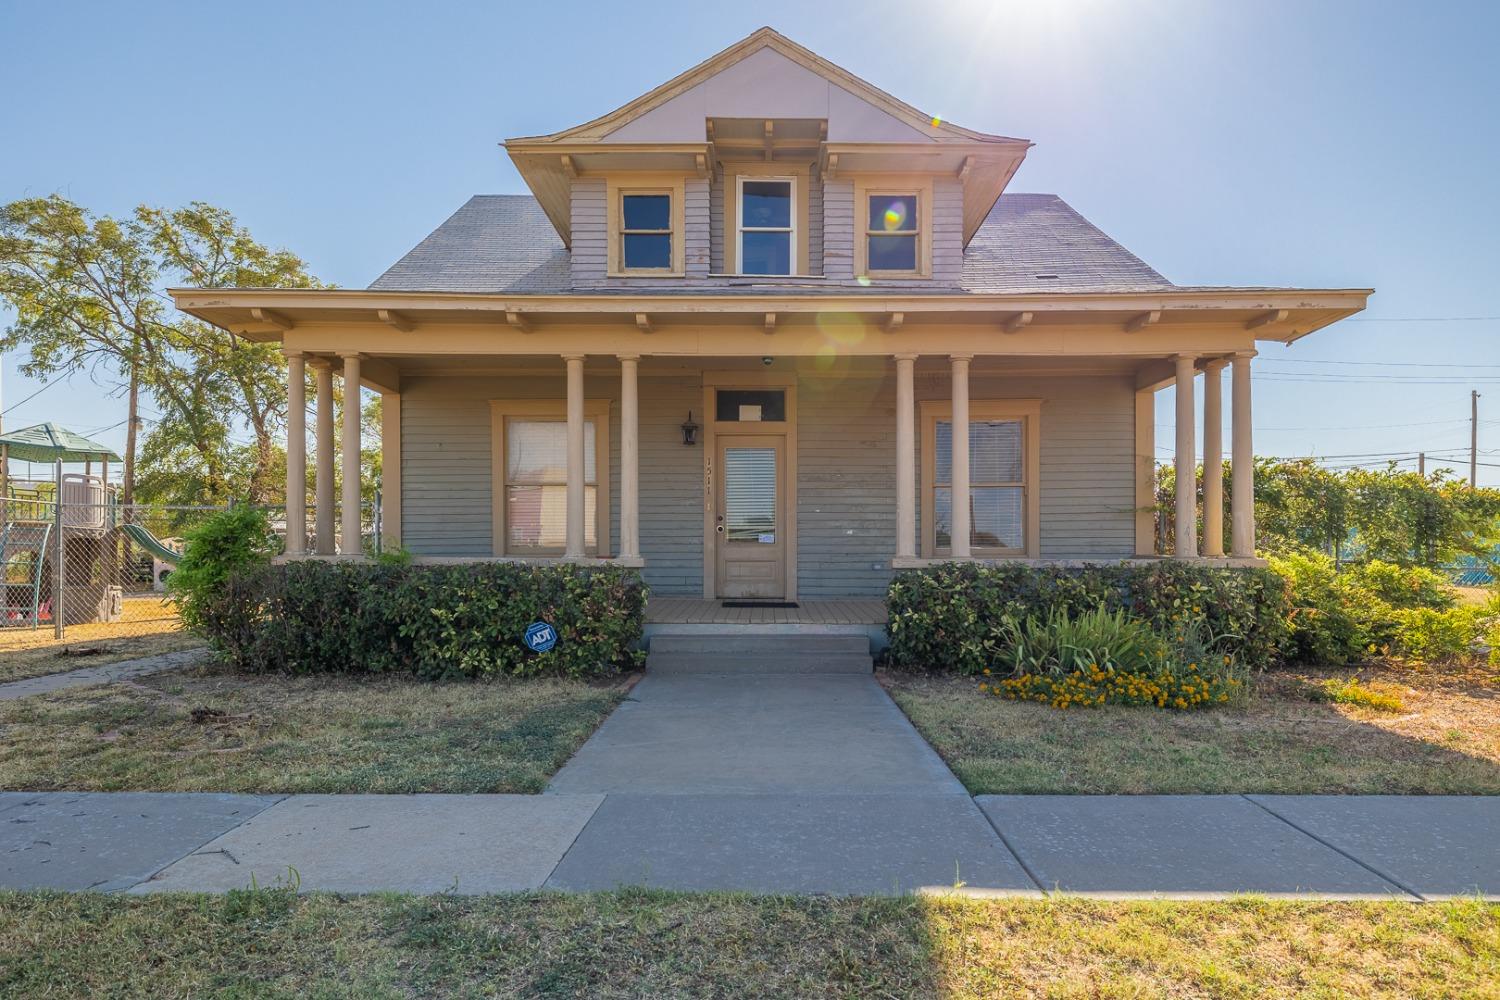 Discover your business' next office at the historical W.D. Benson House. This well-maintained gem offers potential office space for your business and an additional second-story area with endless possibilities. ADA accessible. Embrace a piece of Lubbock's history while building your future.